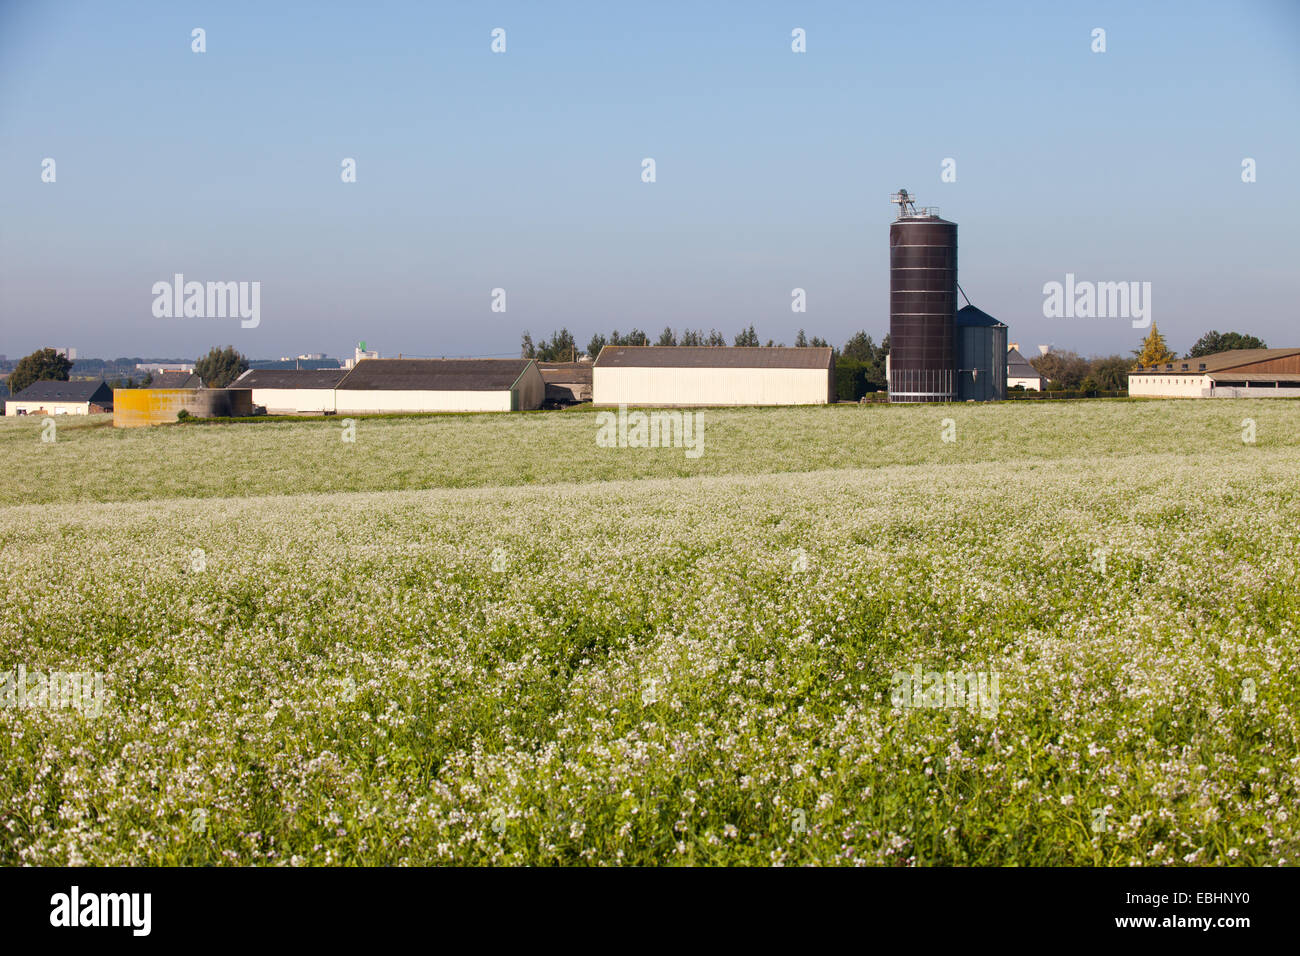 Grain  Silo and other agricultural buildings Stock Photo